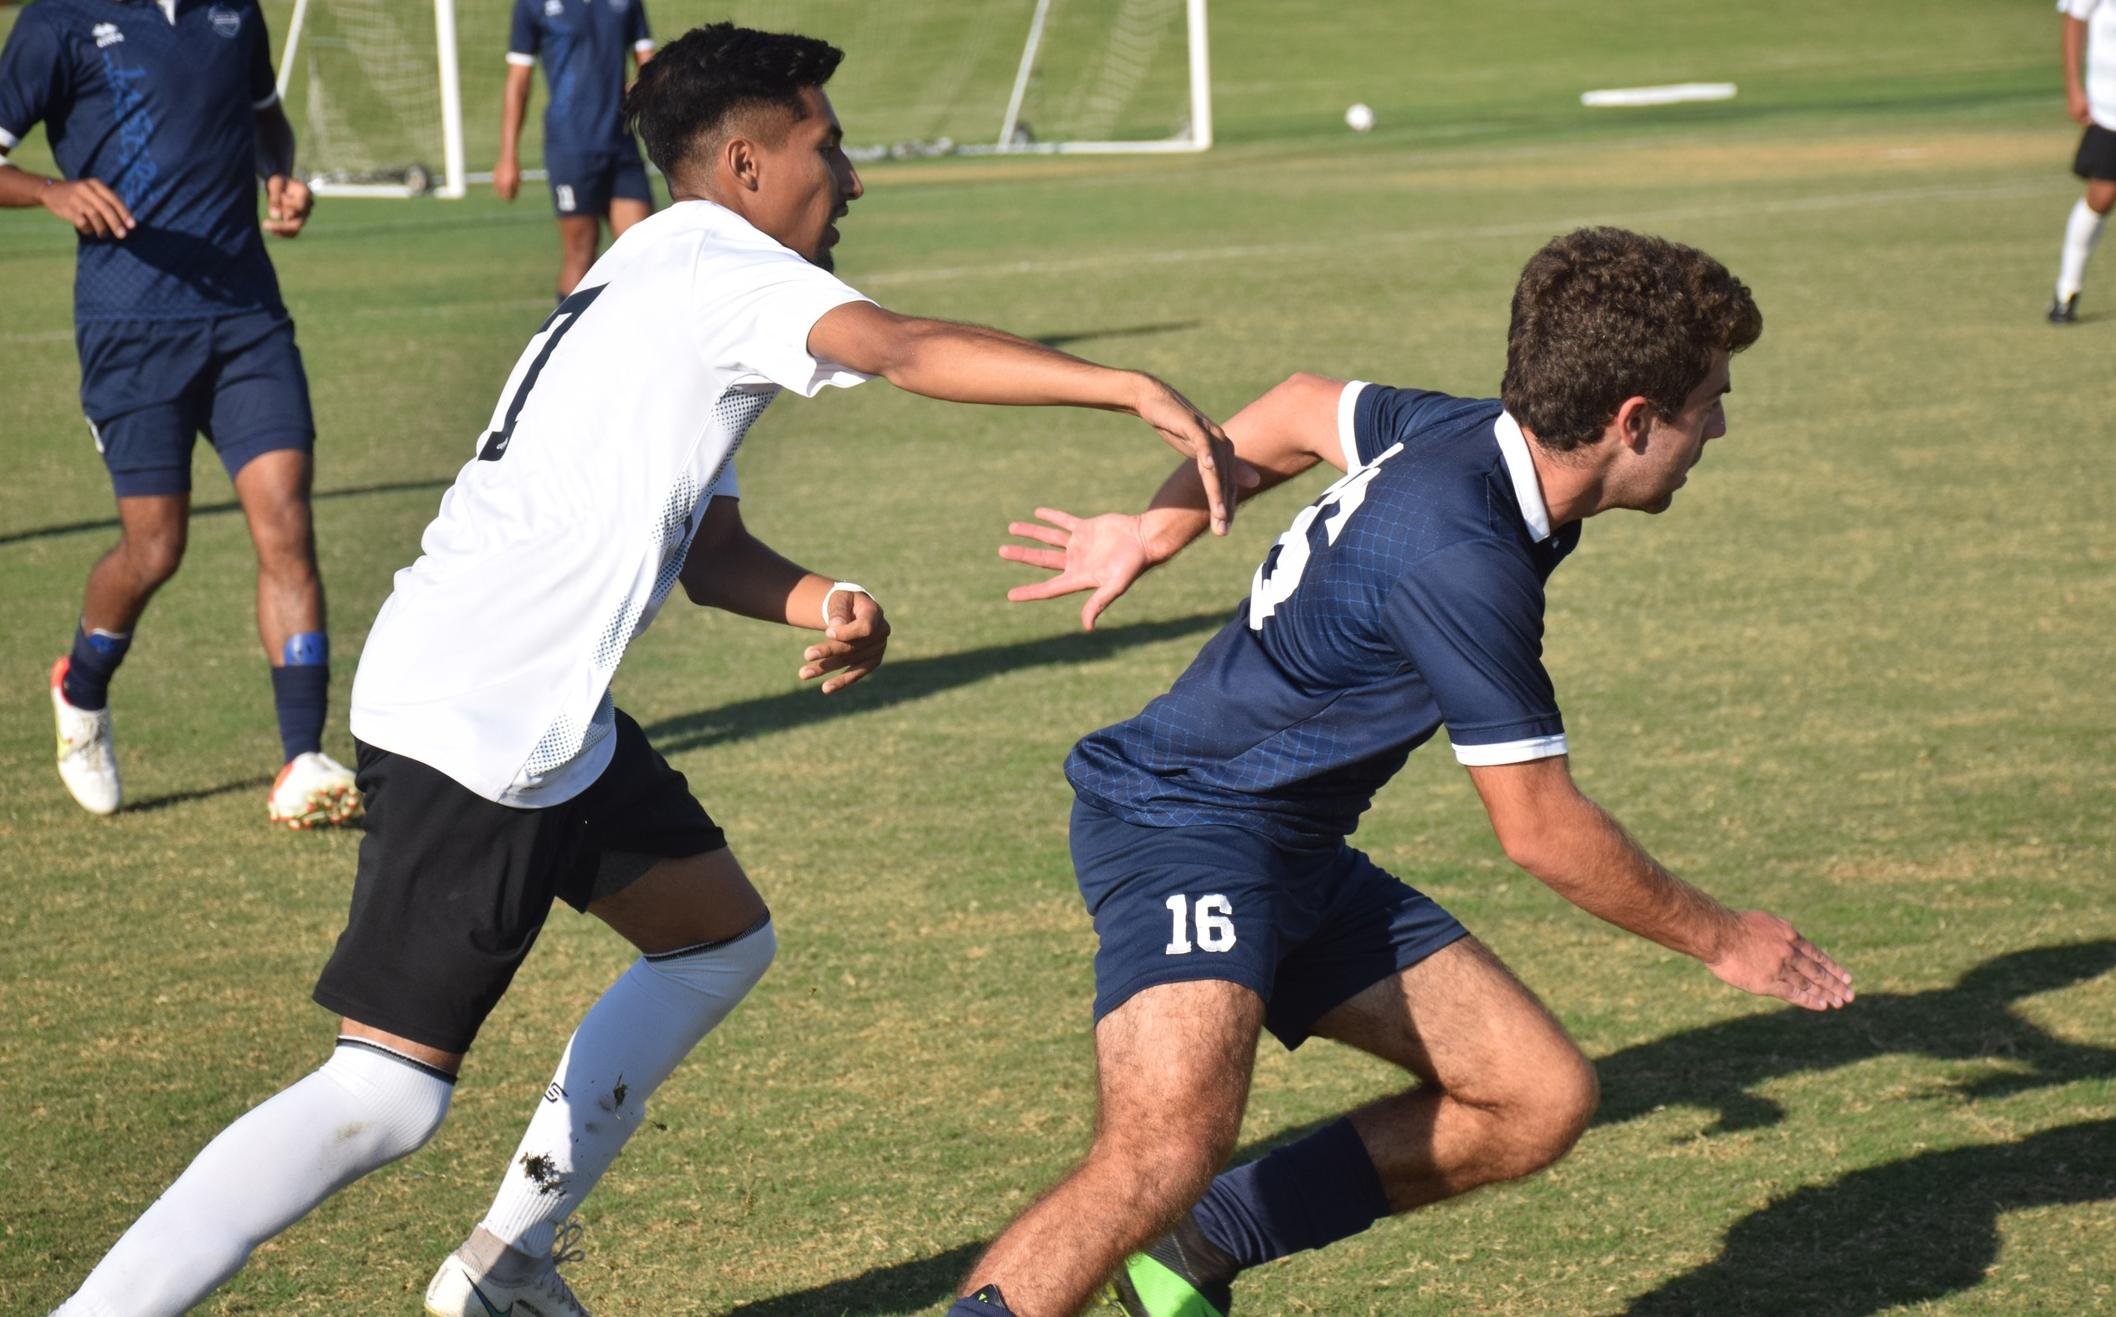 Men's soccer team drops match to Golden West at Great Park